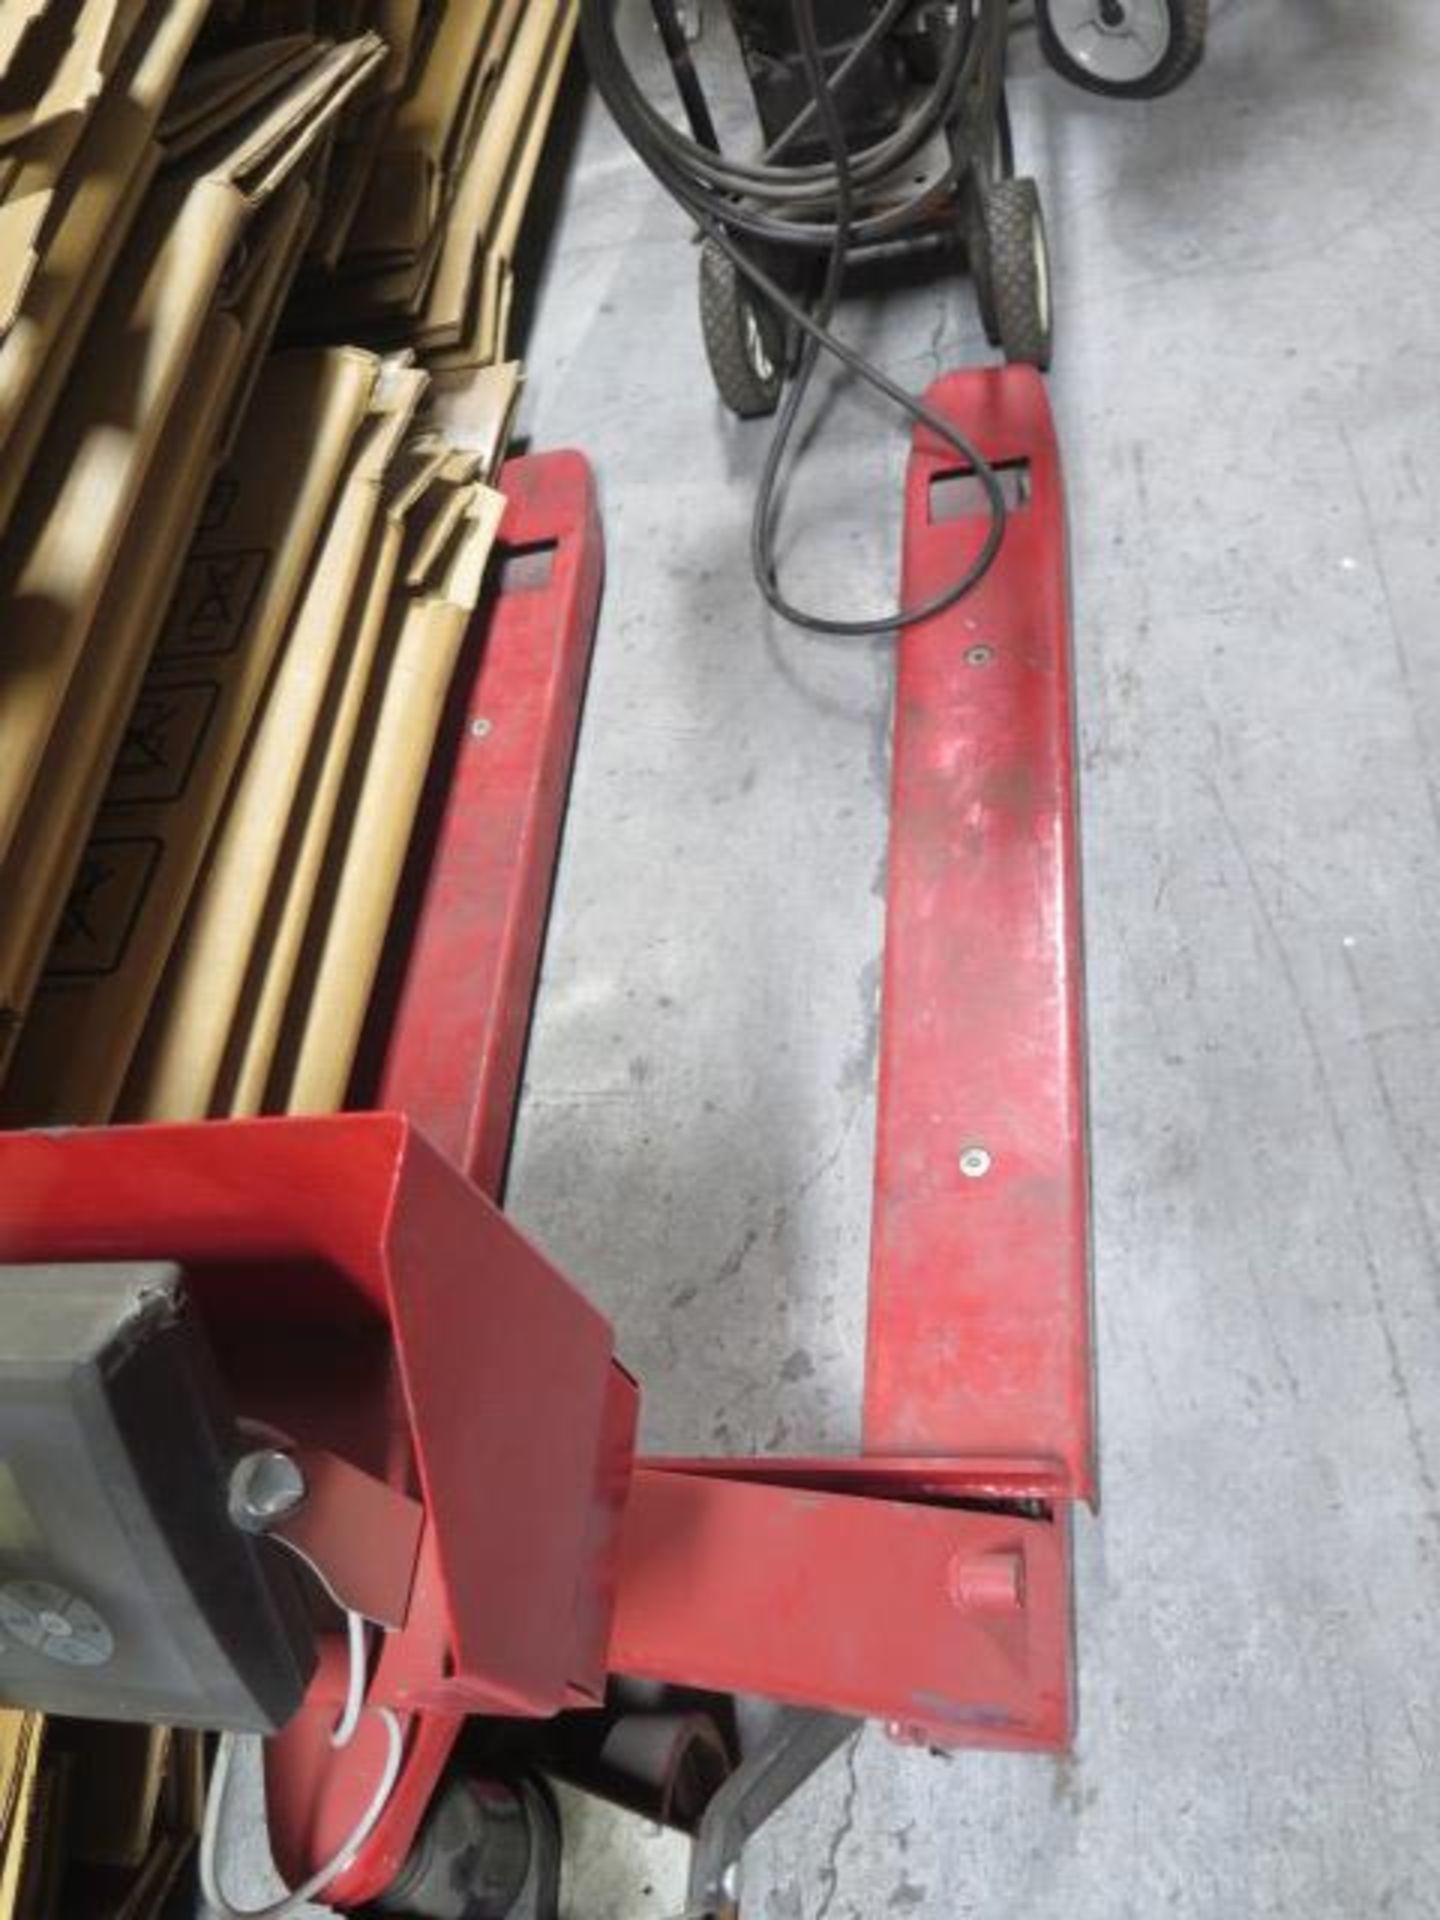 Prime Scale Weighing Pallet Jack w/ mdl. PS-IN103 Digital Scale (SOLD AS-IS - NO WARRANTY) - Image 3 of 5